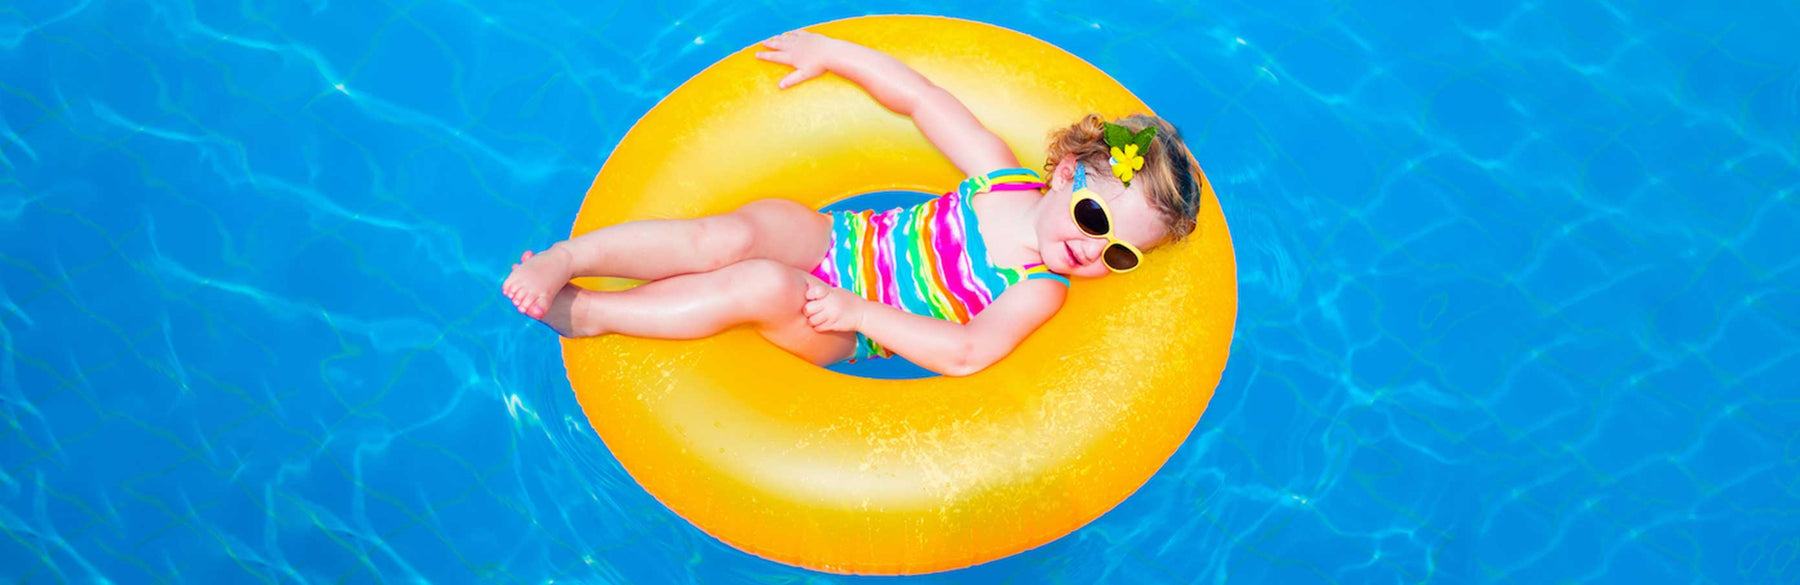 7 Easy Ways To Give Kids Fun Pool Play With Less Risk - Great Backyard Place